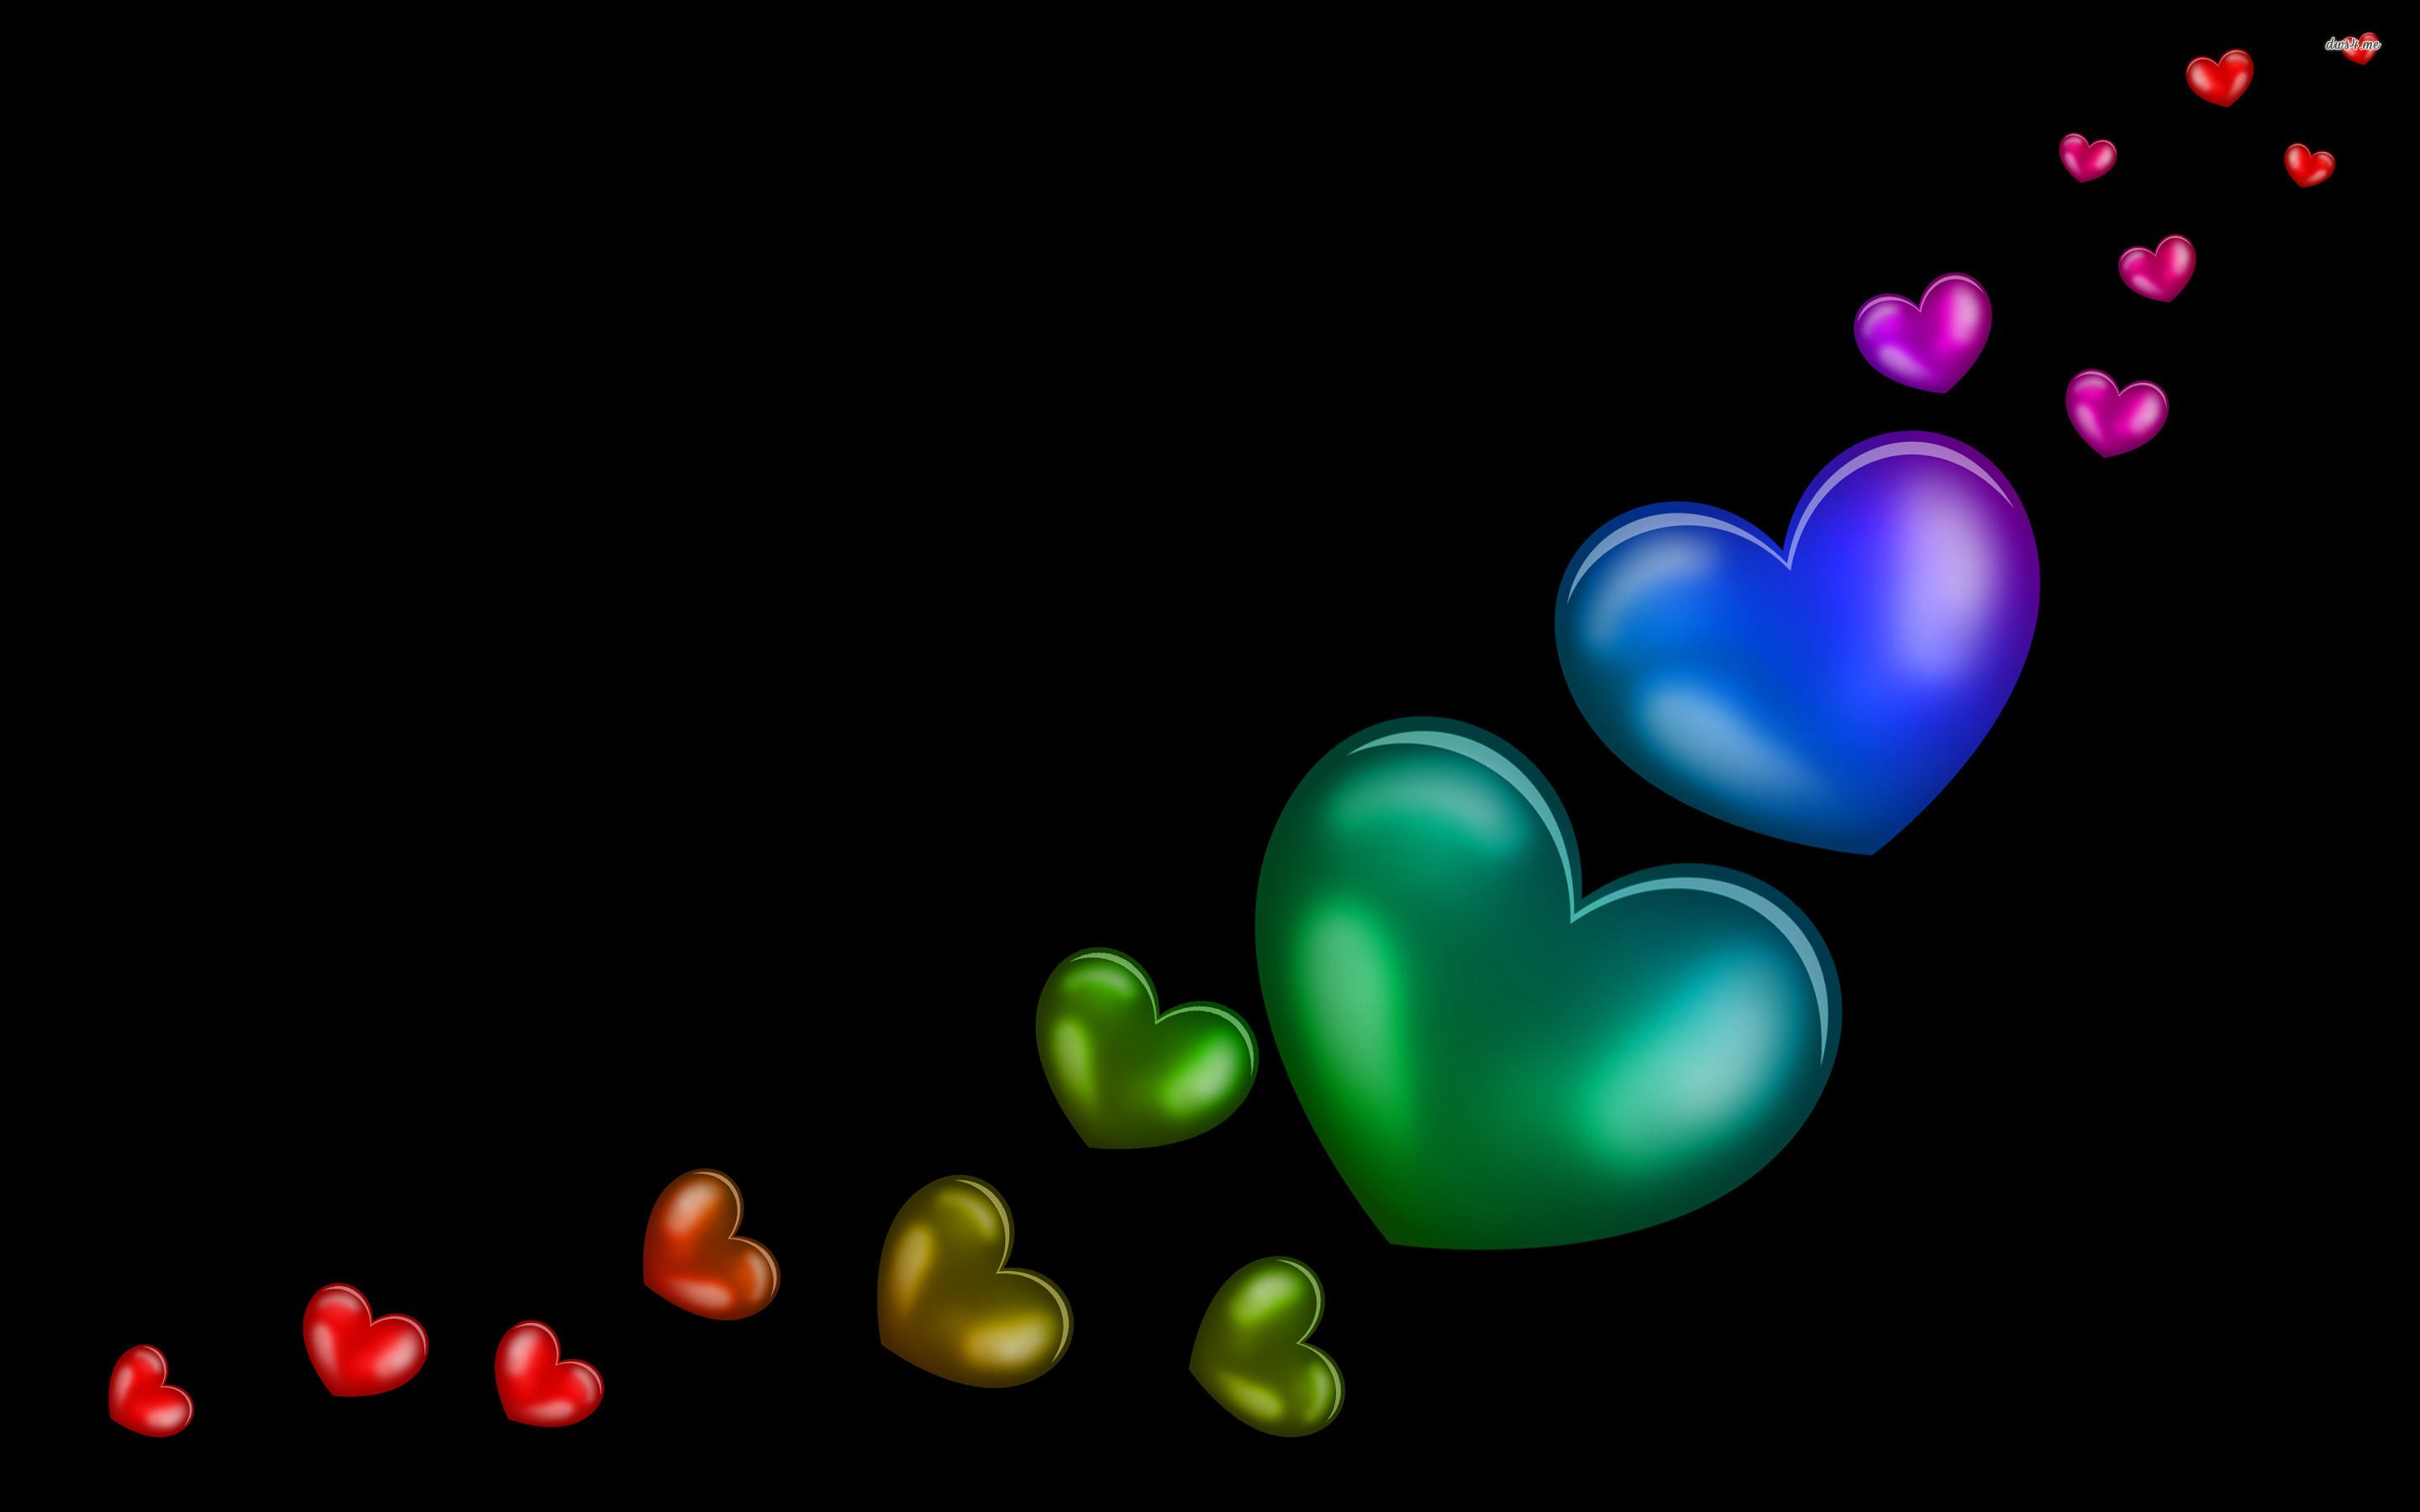 Colorful Hearts Wallpapers on WallpaperDog